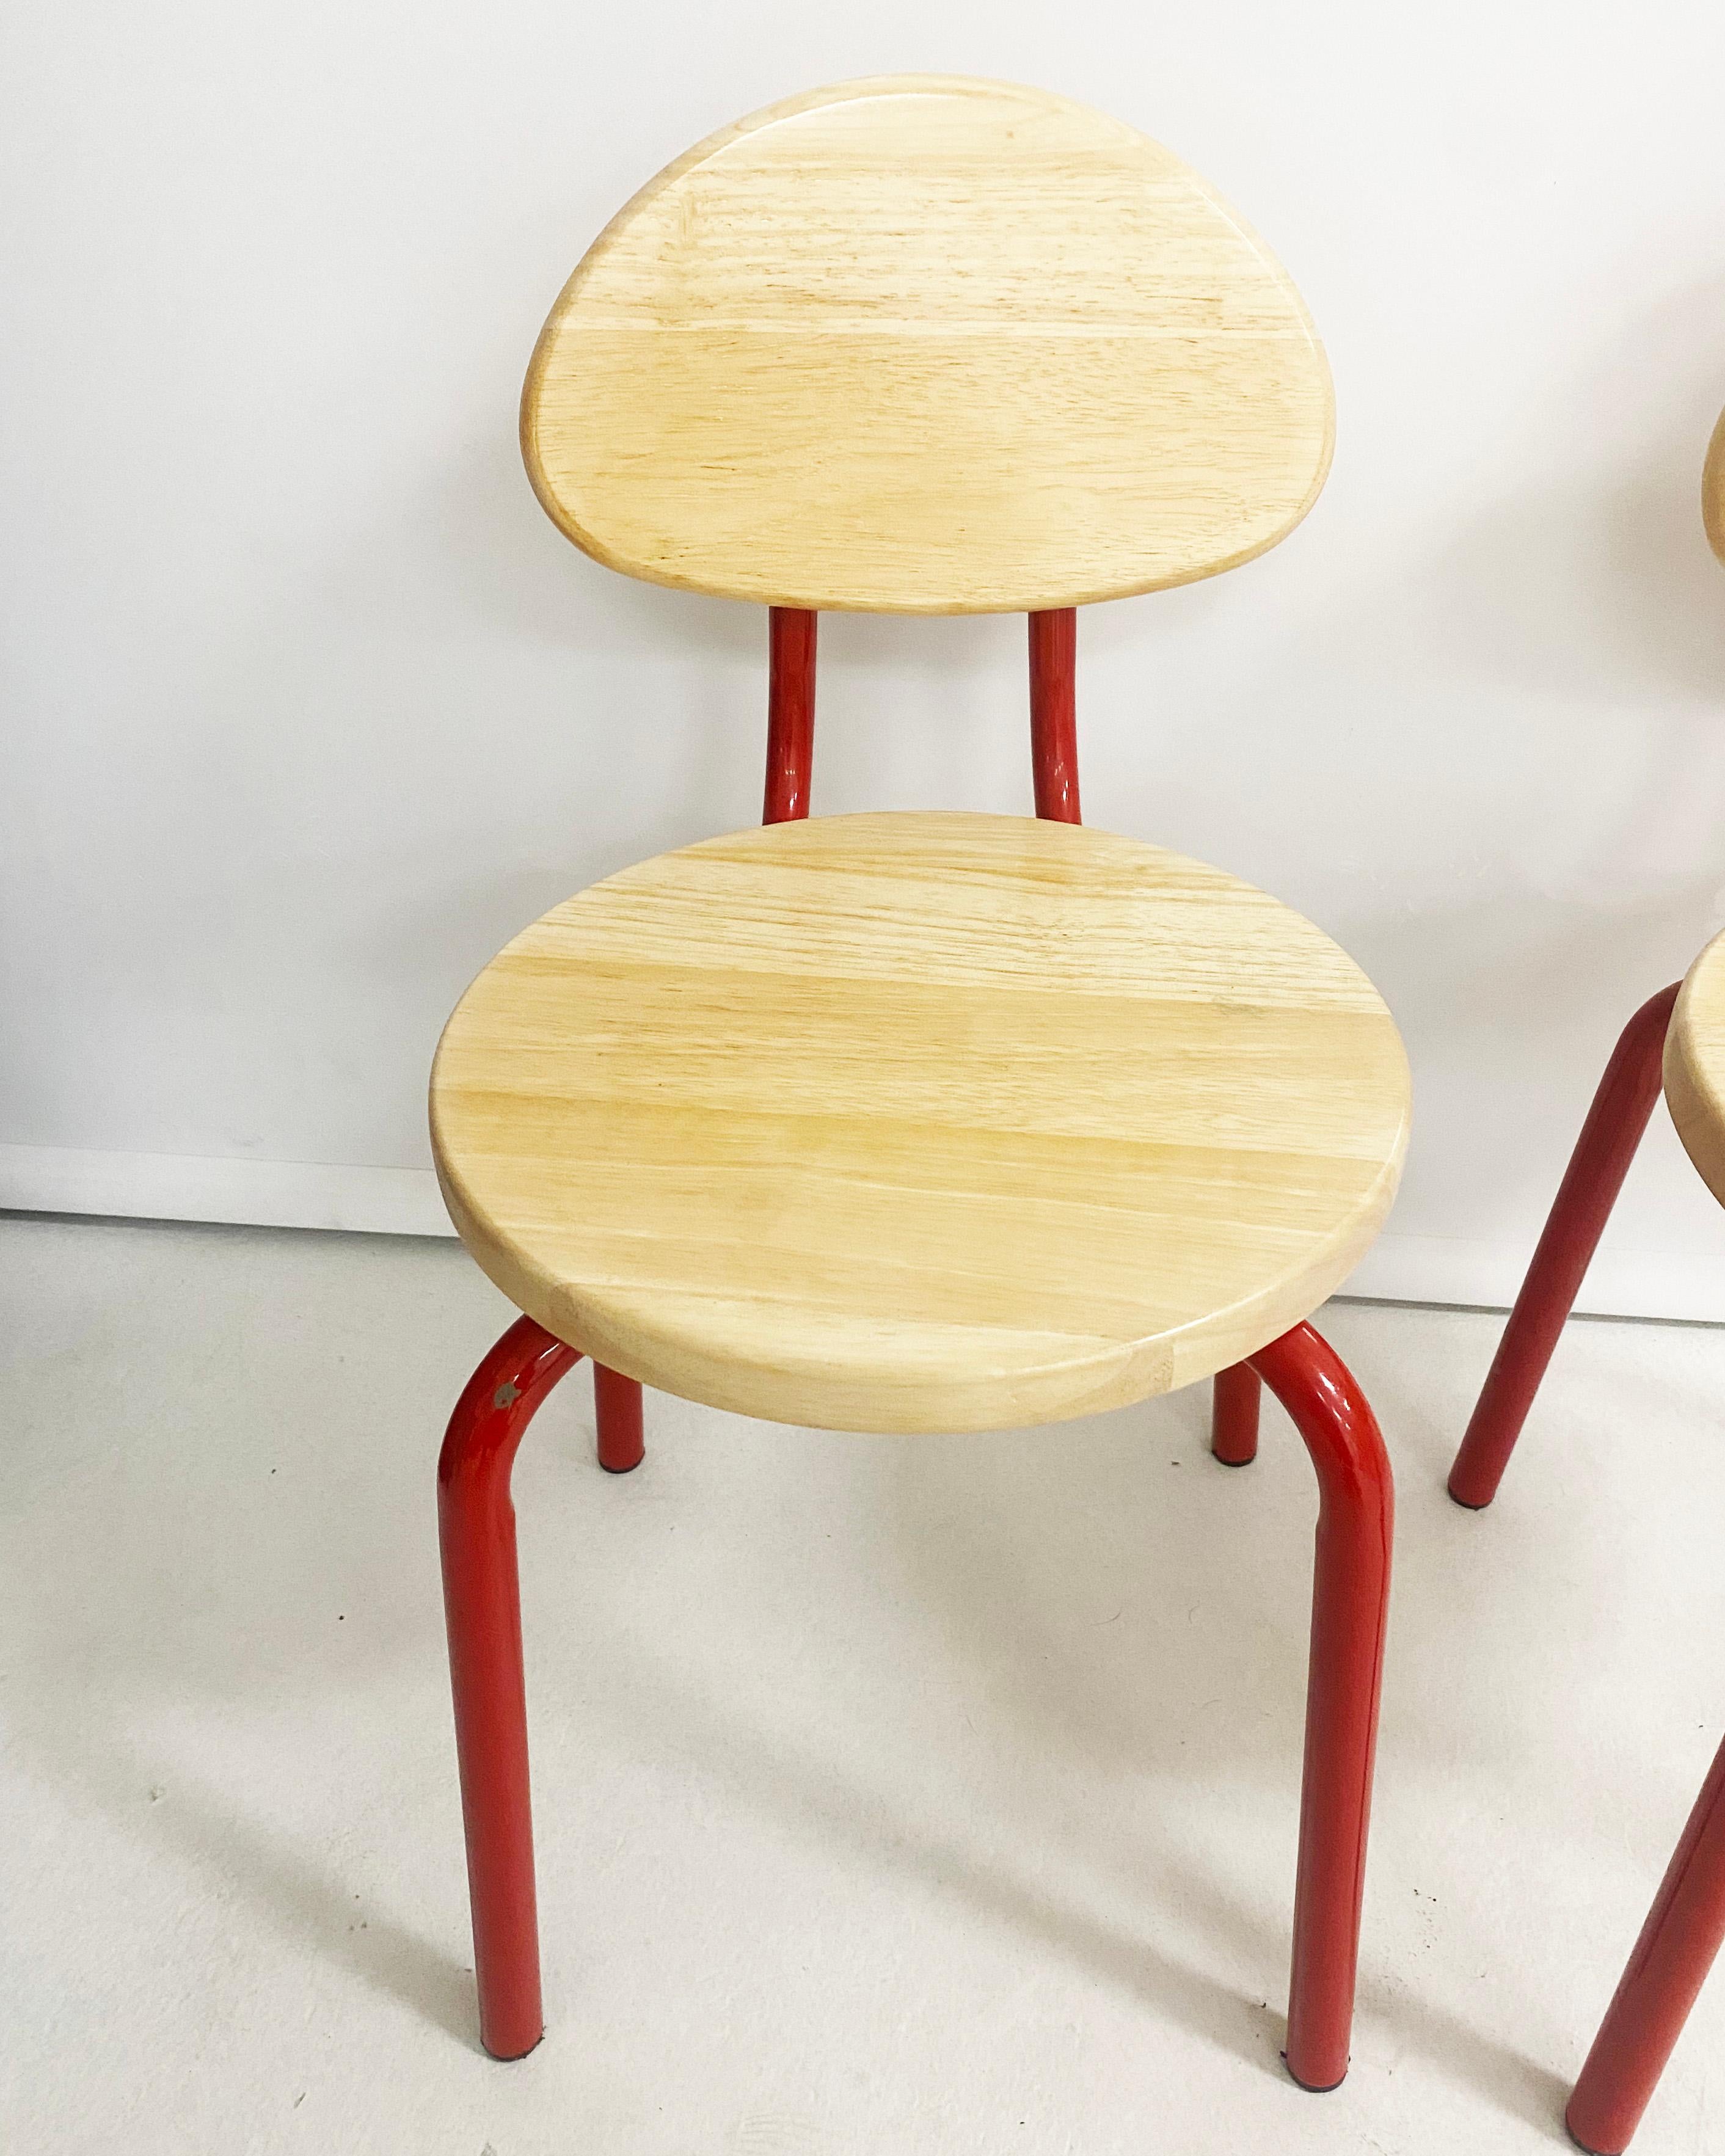 1980s Memphis Milano style wood and red metal chairs for small children aged 2-4. Both have a significant amount of paint and wear to wood. Two available and sold as a pair. 